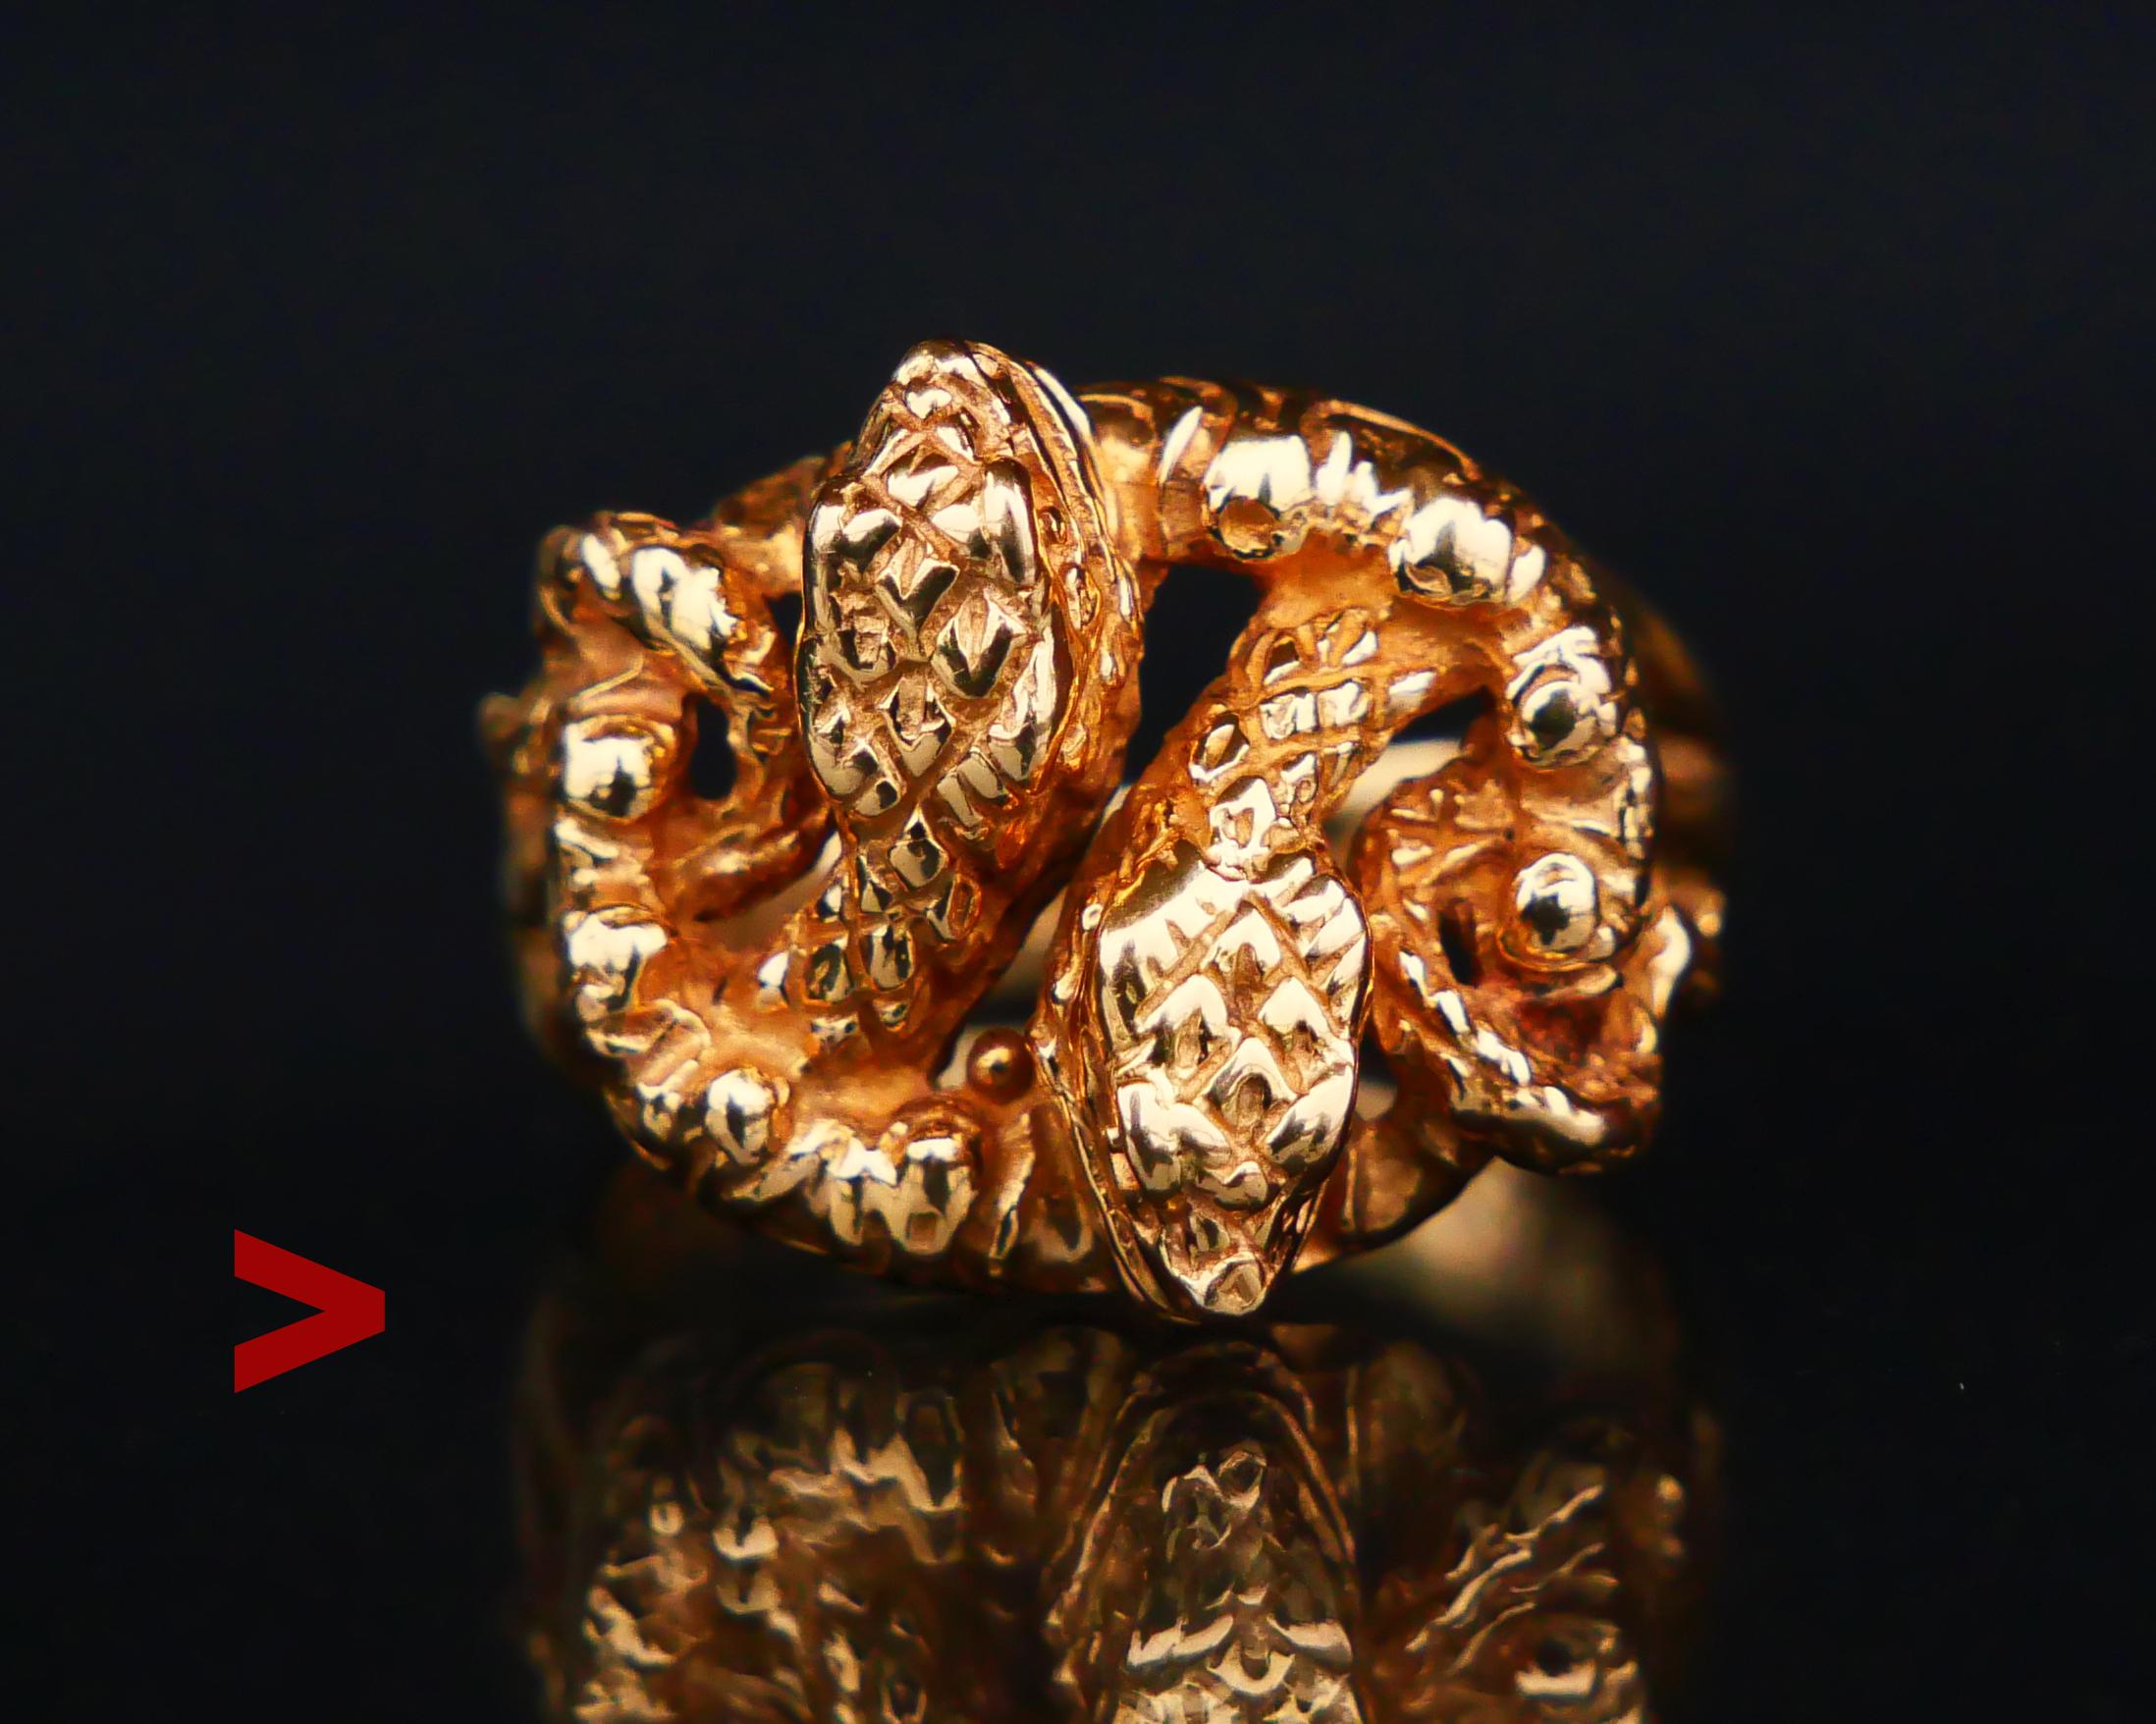 Antique Ring for Men or Women Designed as Interweaving Snakes in solid 18K Yellow Gold. Cast bodies of reptiles with detailed scales, eyes, and teeth.

The design of this ring is unisex, it will look nice on male or female fingers if the size is